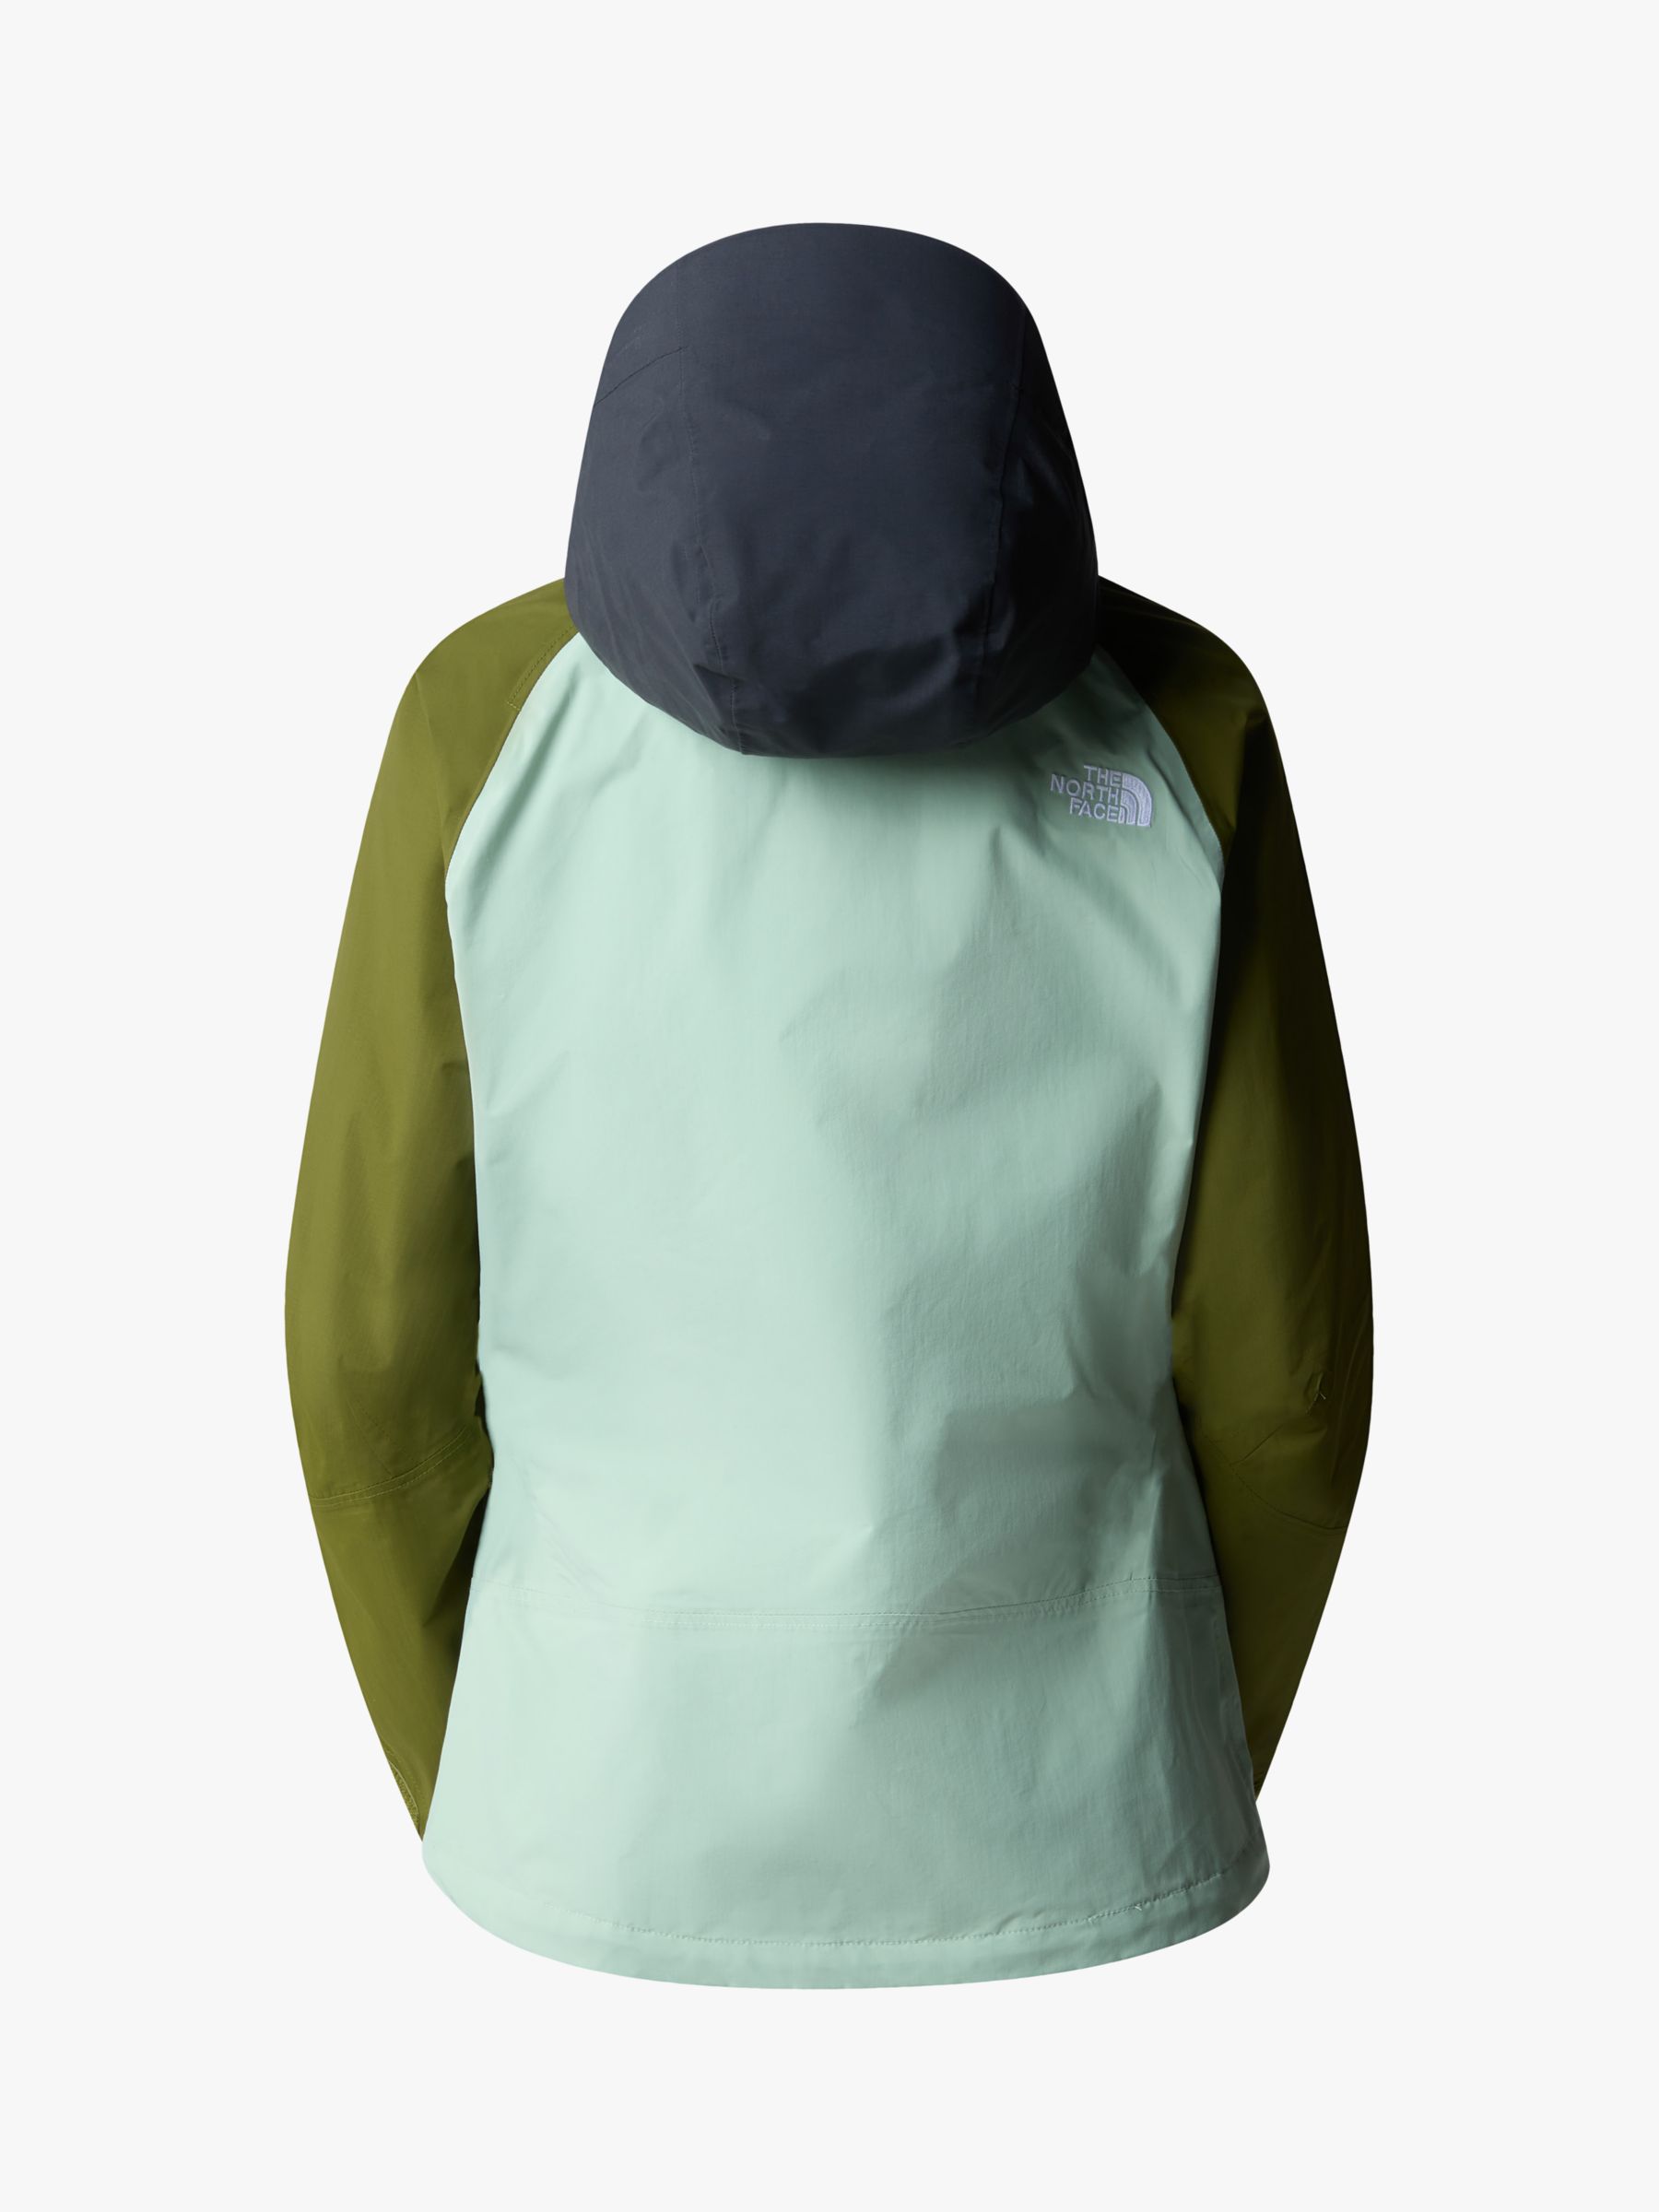 Buy The North Face Women's Stratos Hooded Jacket, Olive/Multi Online at johnlewis.com